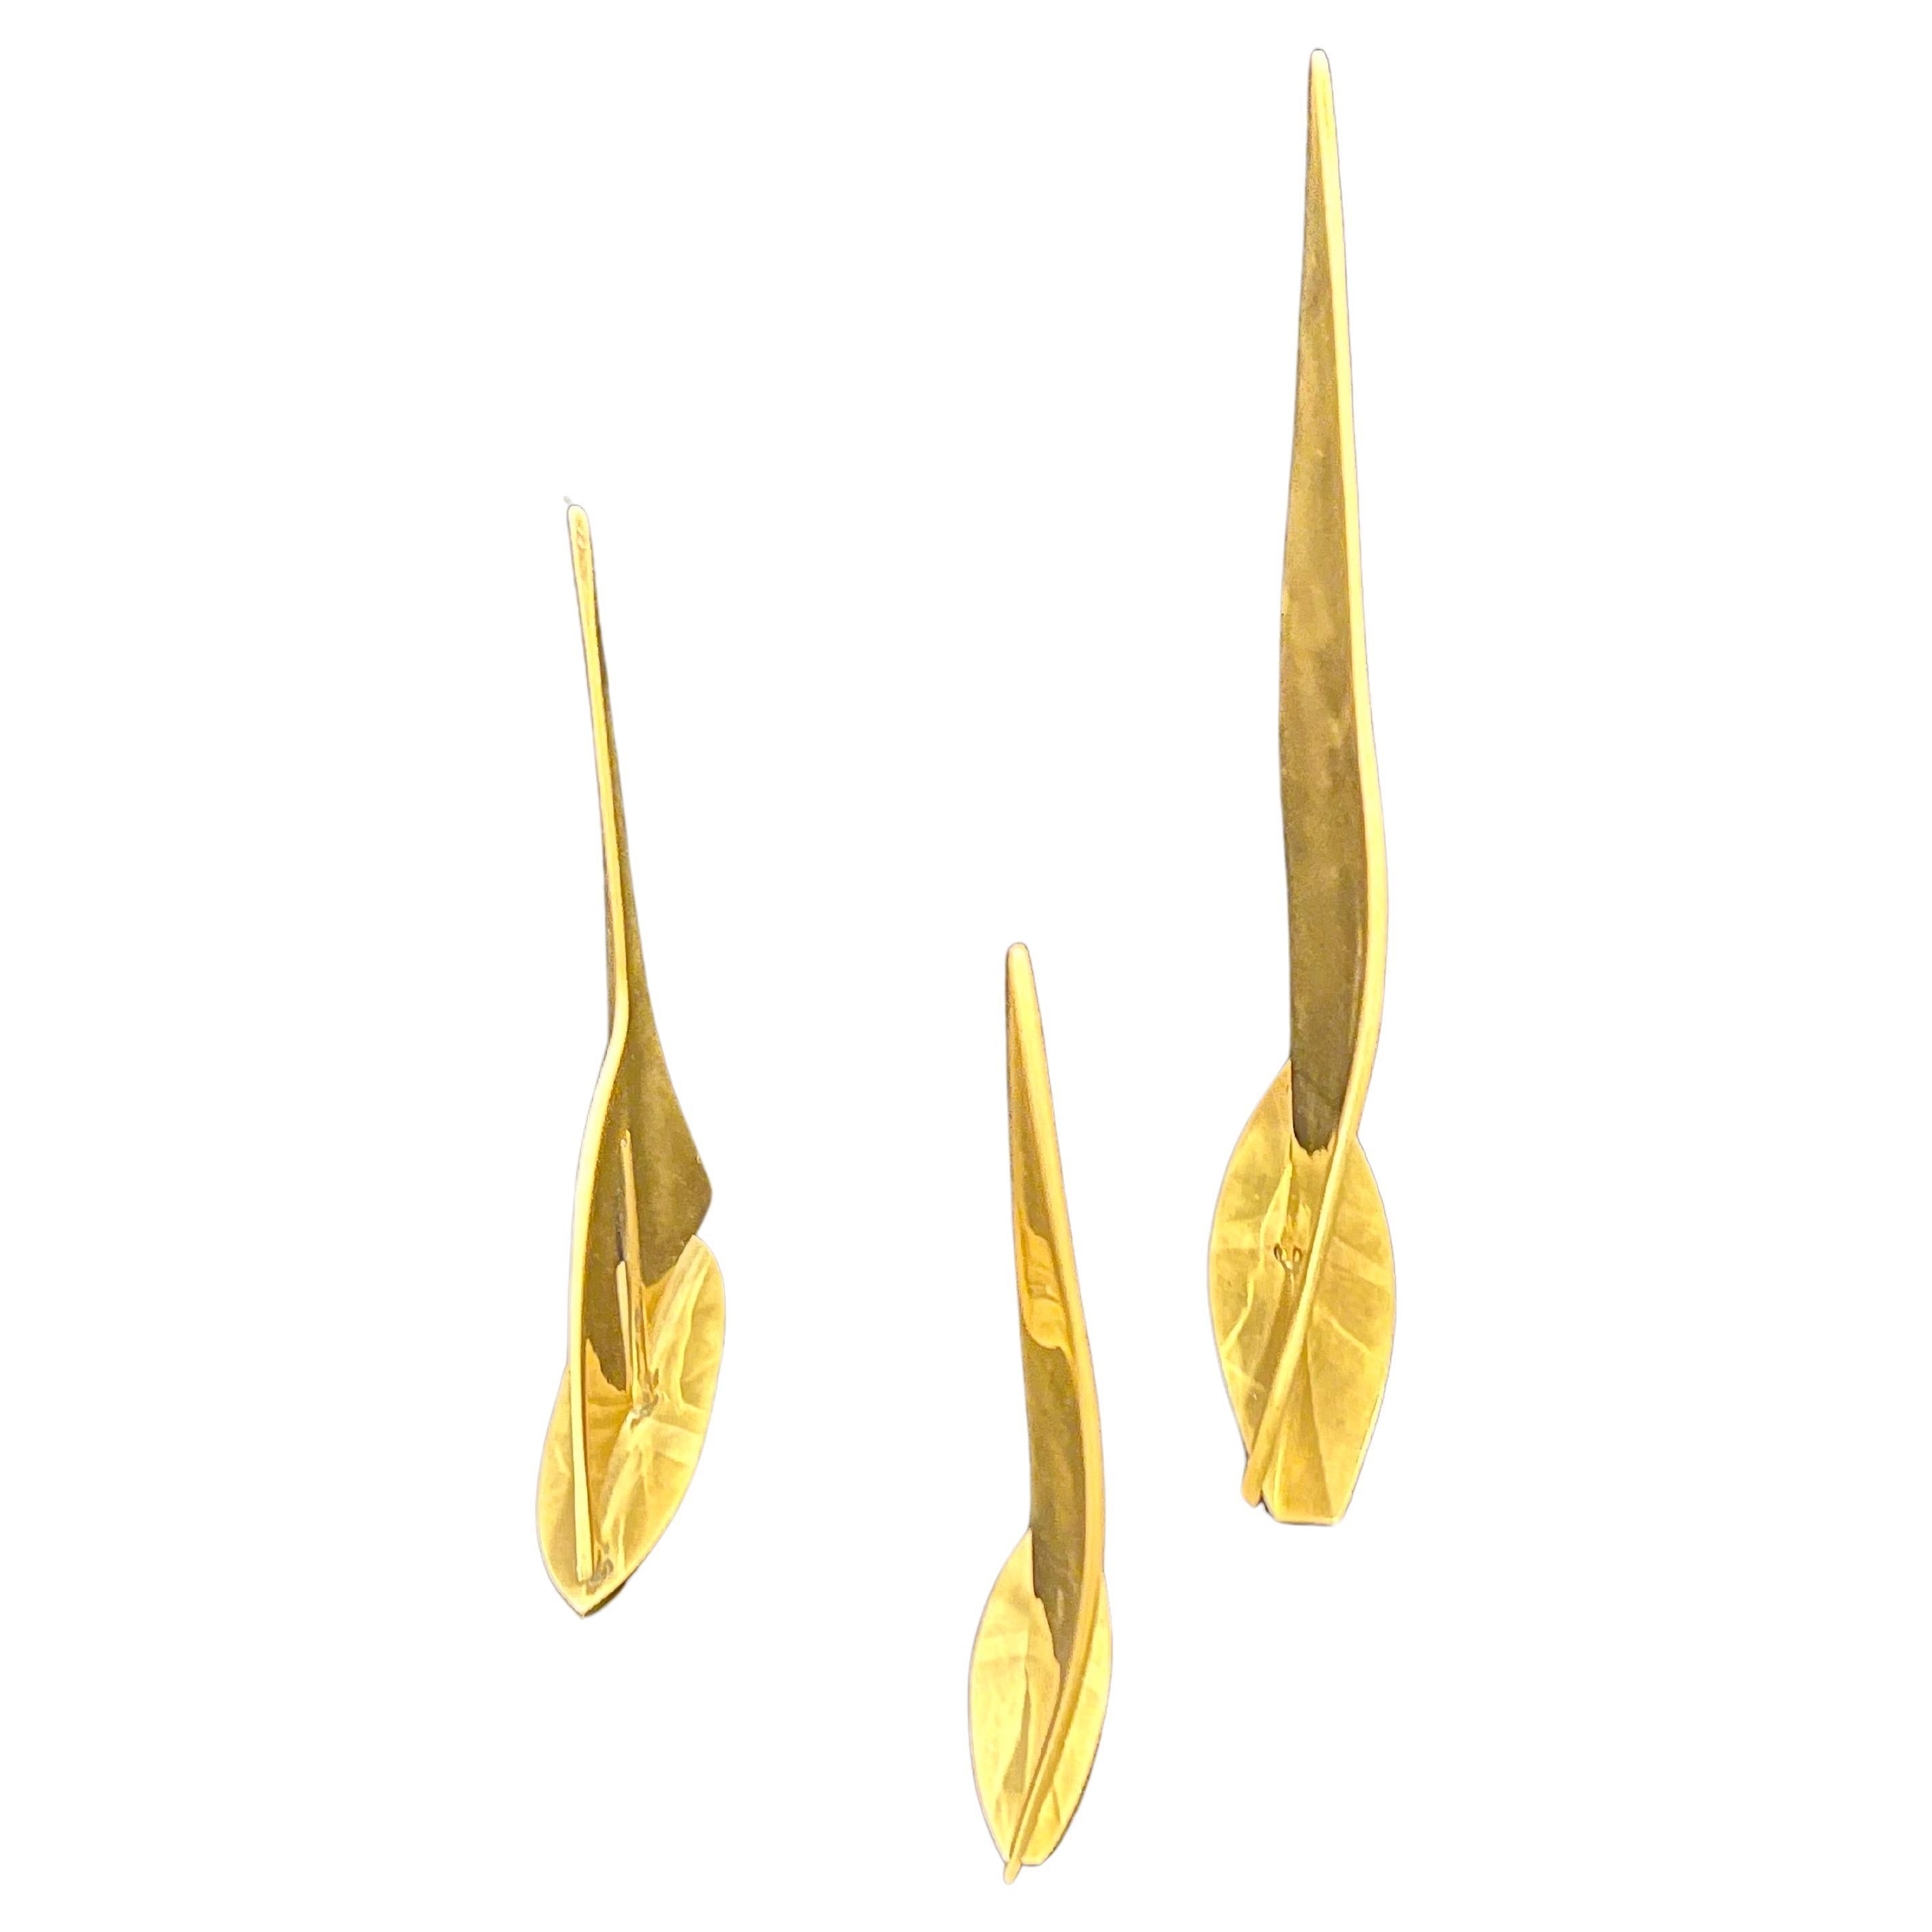 A whimsical set of 3 polished brass sailboats in 3 different sizes small to large, beautiful tabletop decorative sculptures.